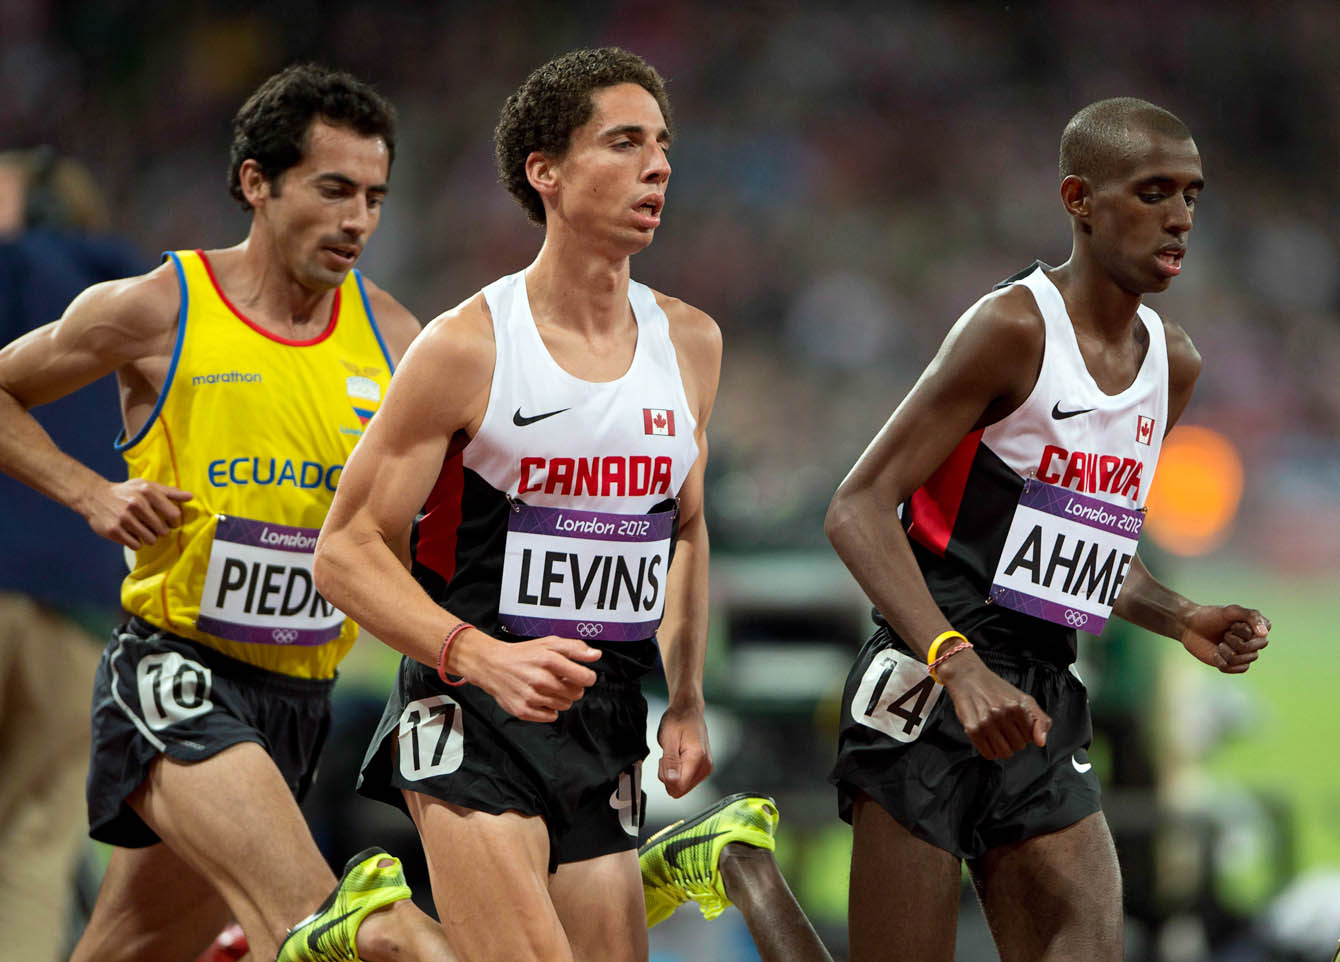 Canada's Cameron Levins, centre, and Ahmed Mohammed, right, pass Ecuador's Bayron Piedra, left, in the men's 10000-metre final at London 2012. (Photo: CP/Ryan Remiorz)